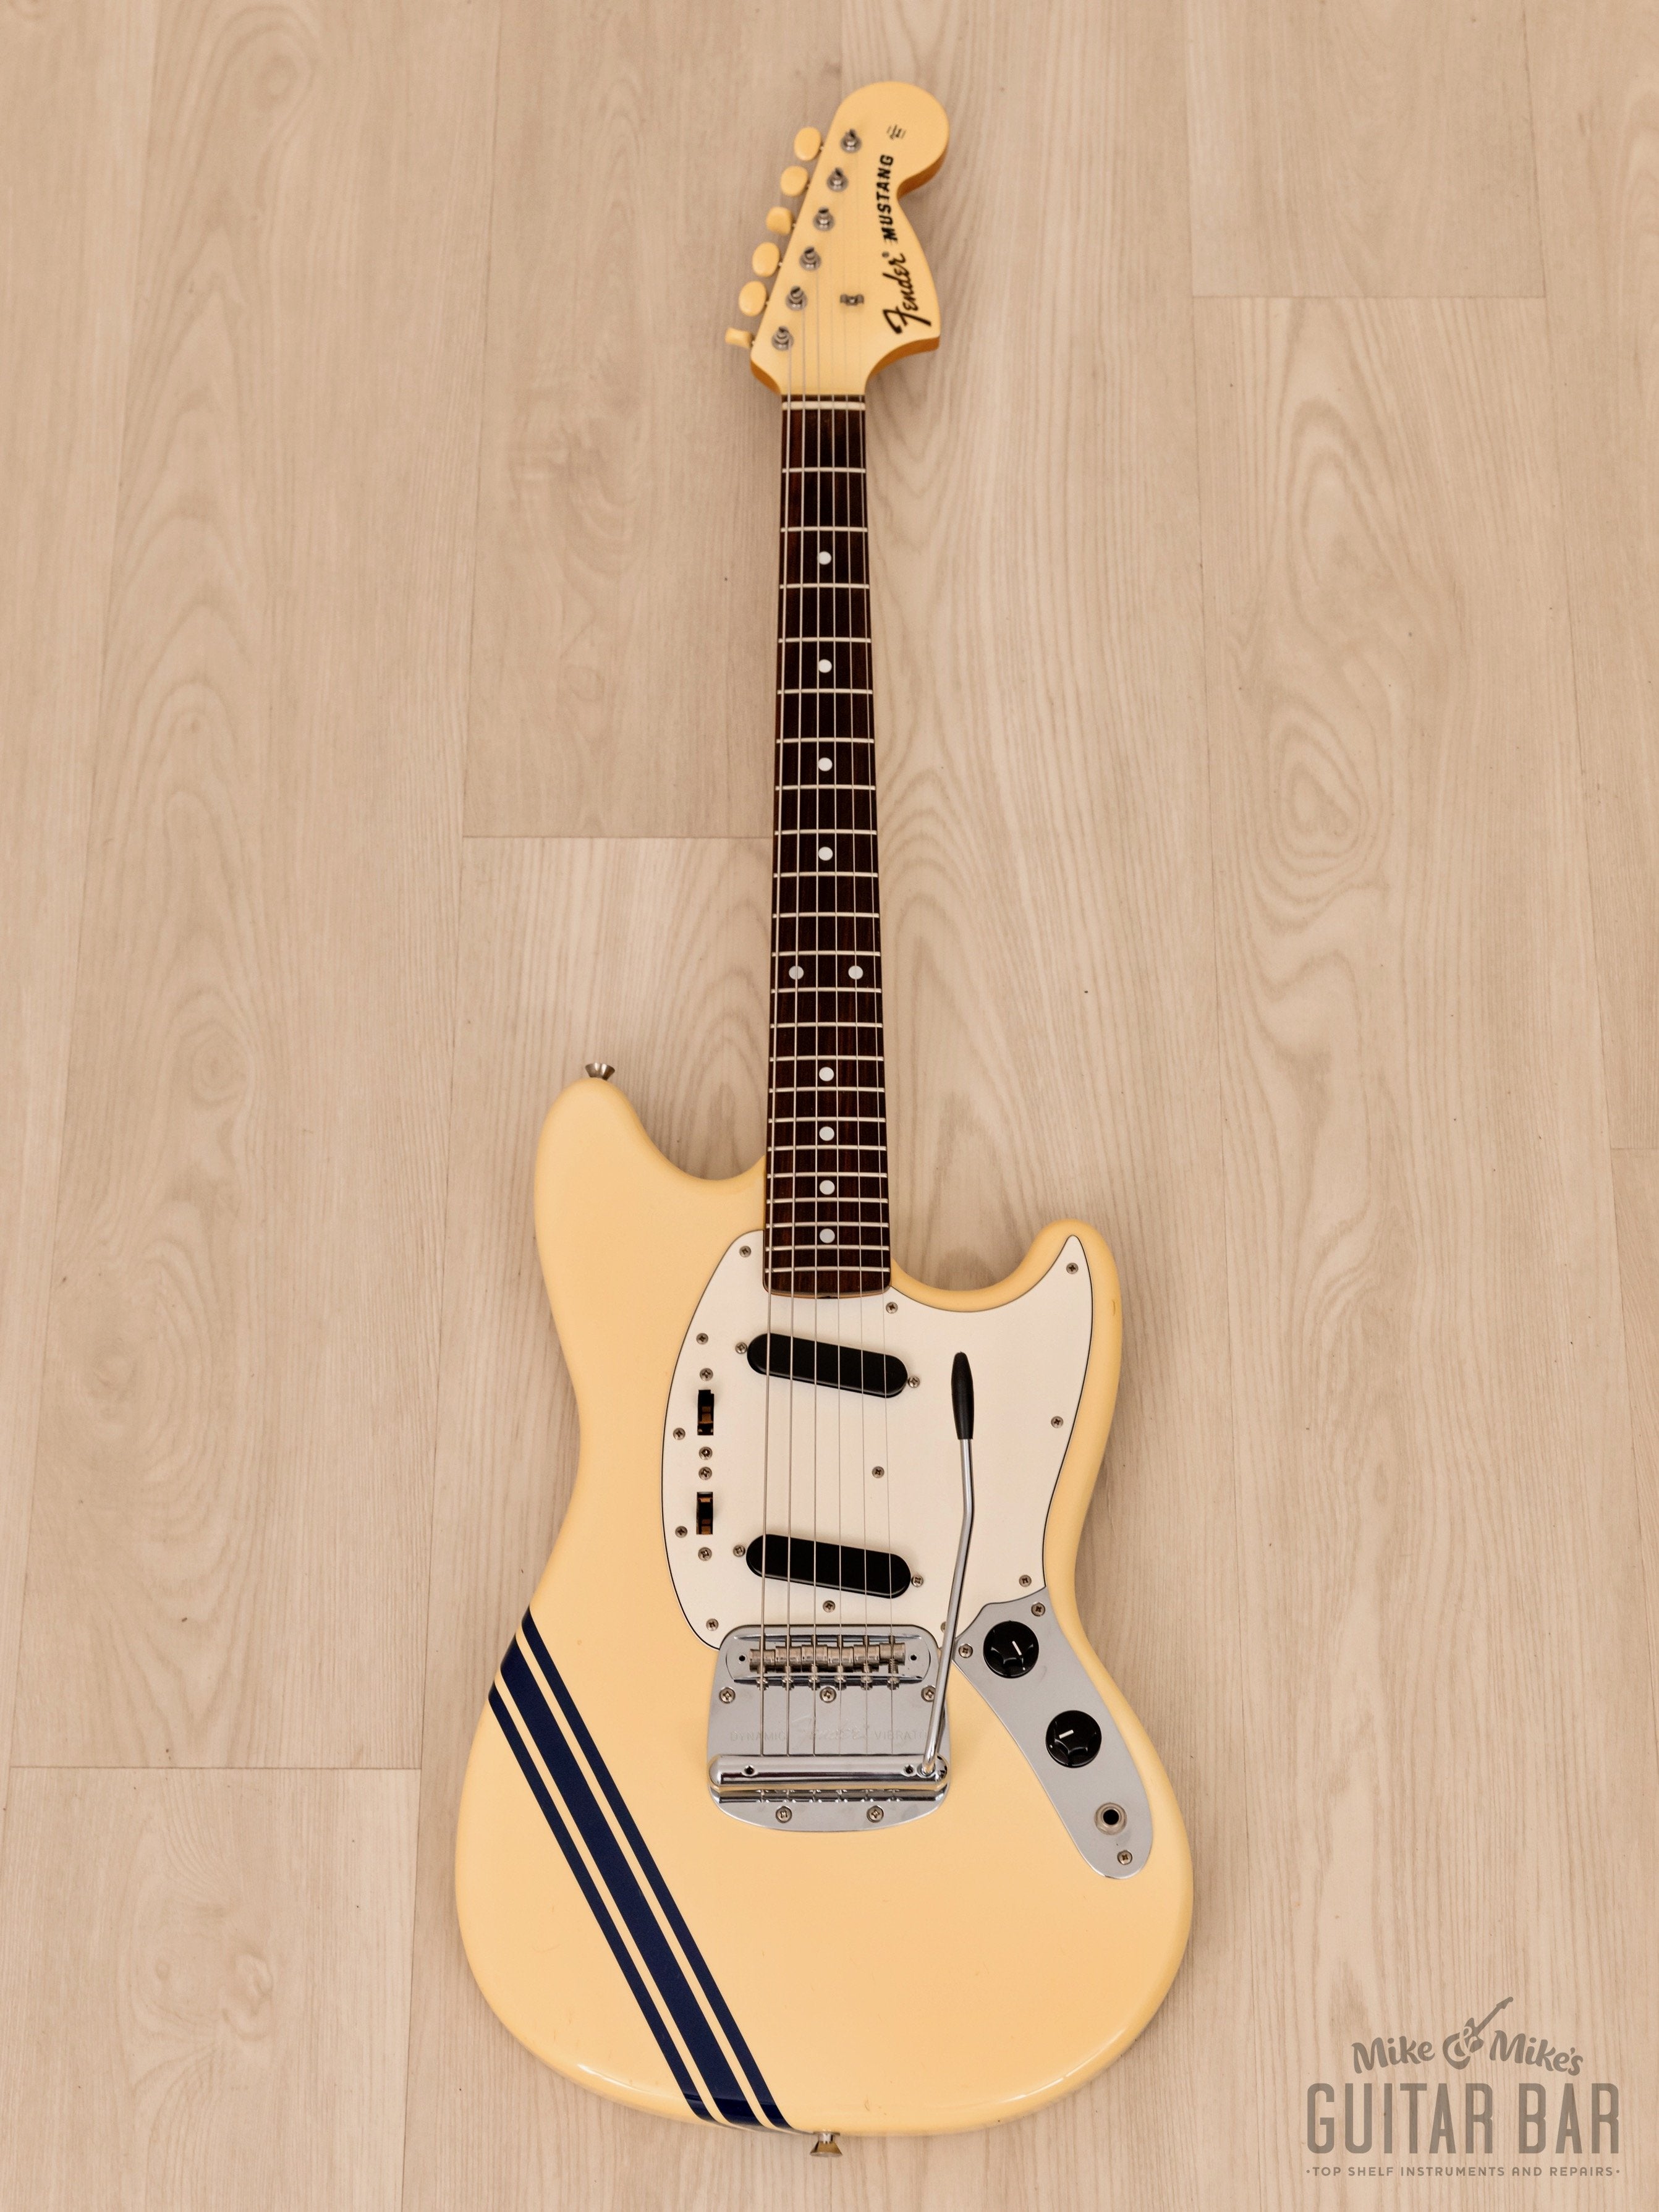 2008 Fender Competition Mustang '73 Vintage Reissue MG73-85/CO Olympic White, Japan CIJ